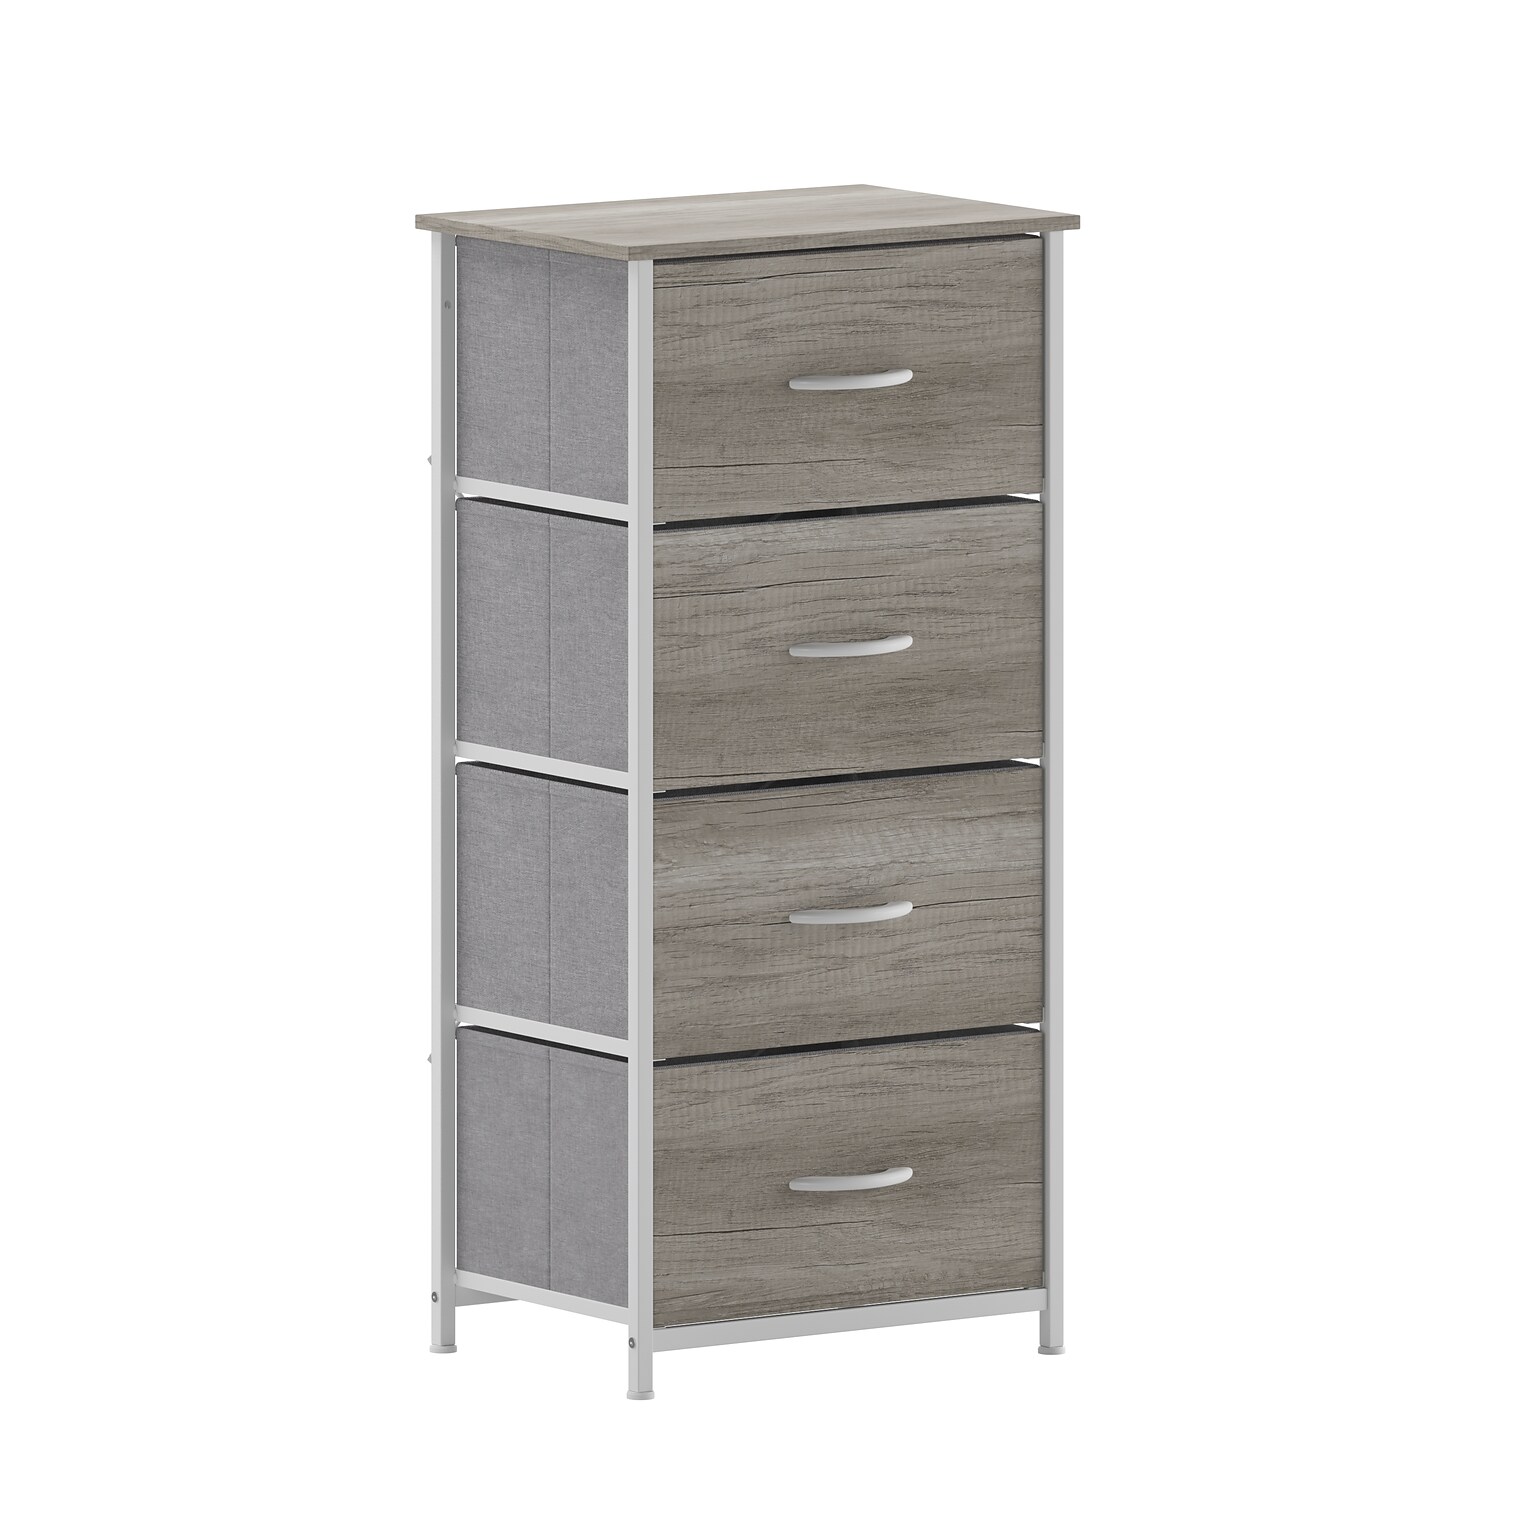 Flash Furniture Harris 4 Drawers Storage Dresser with Engineered Wood Drawers, White/Light Natural (WX5L203MDFWTLNT)